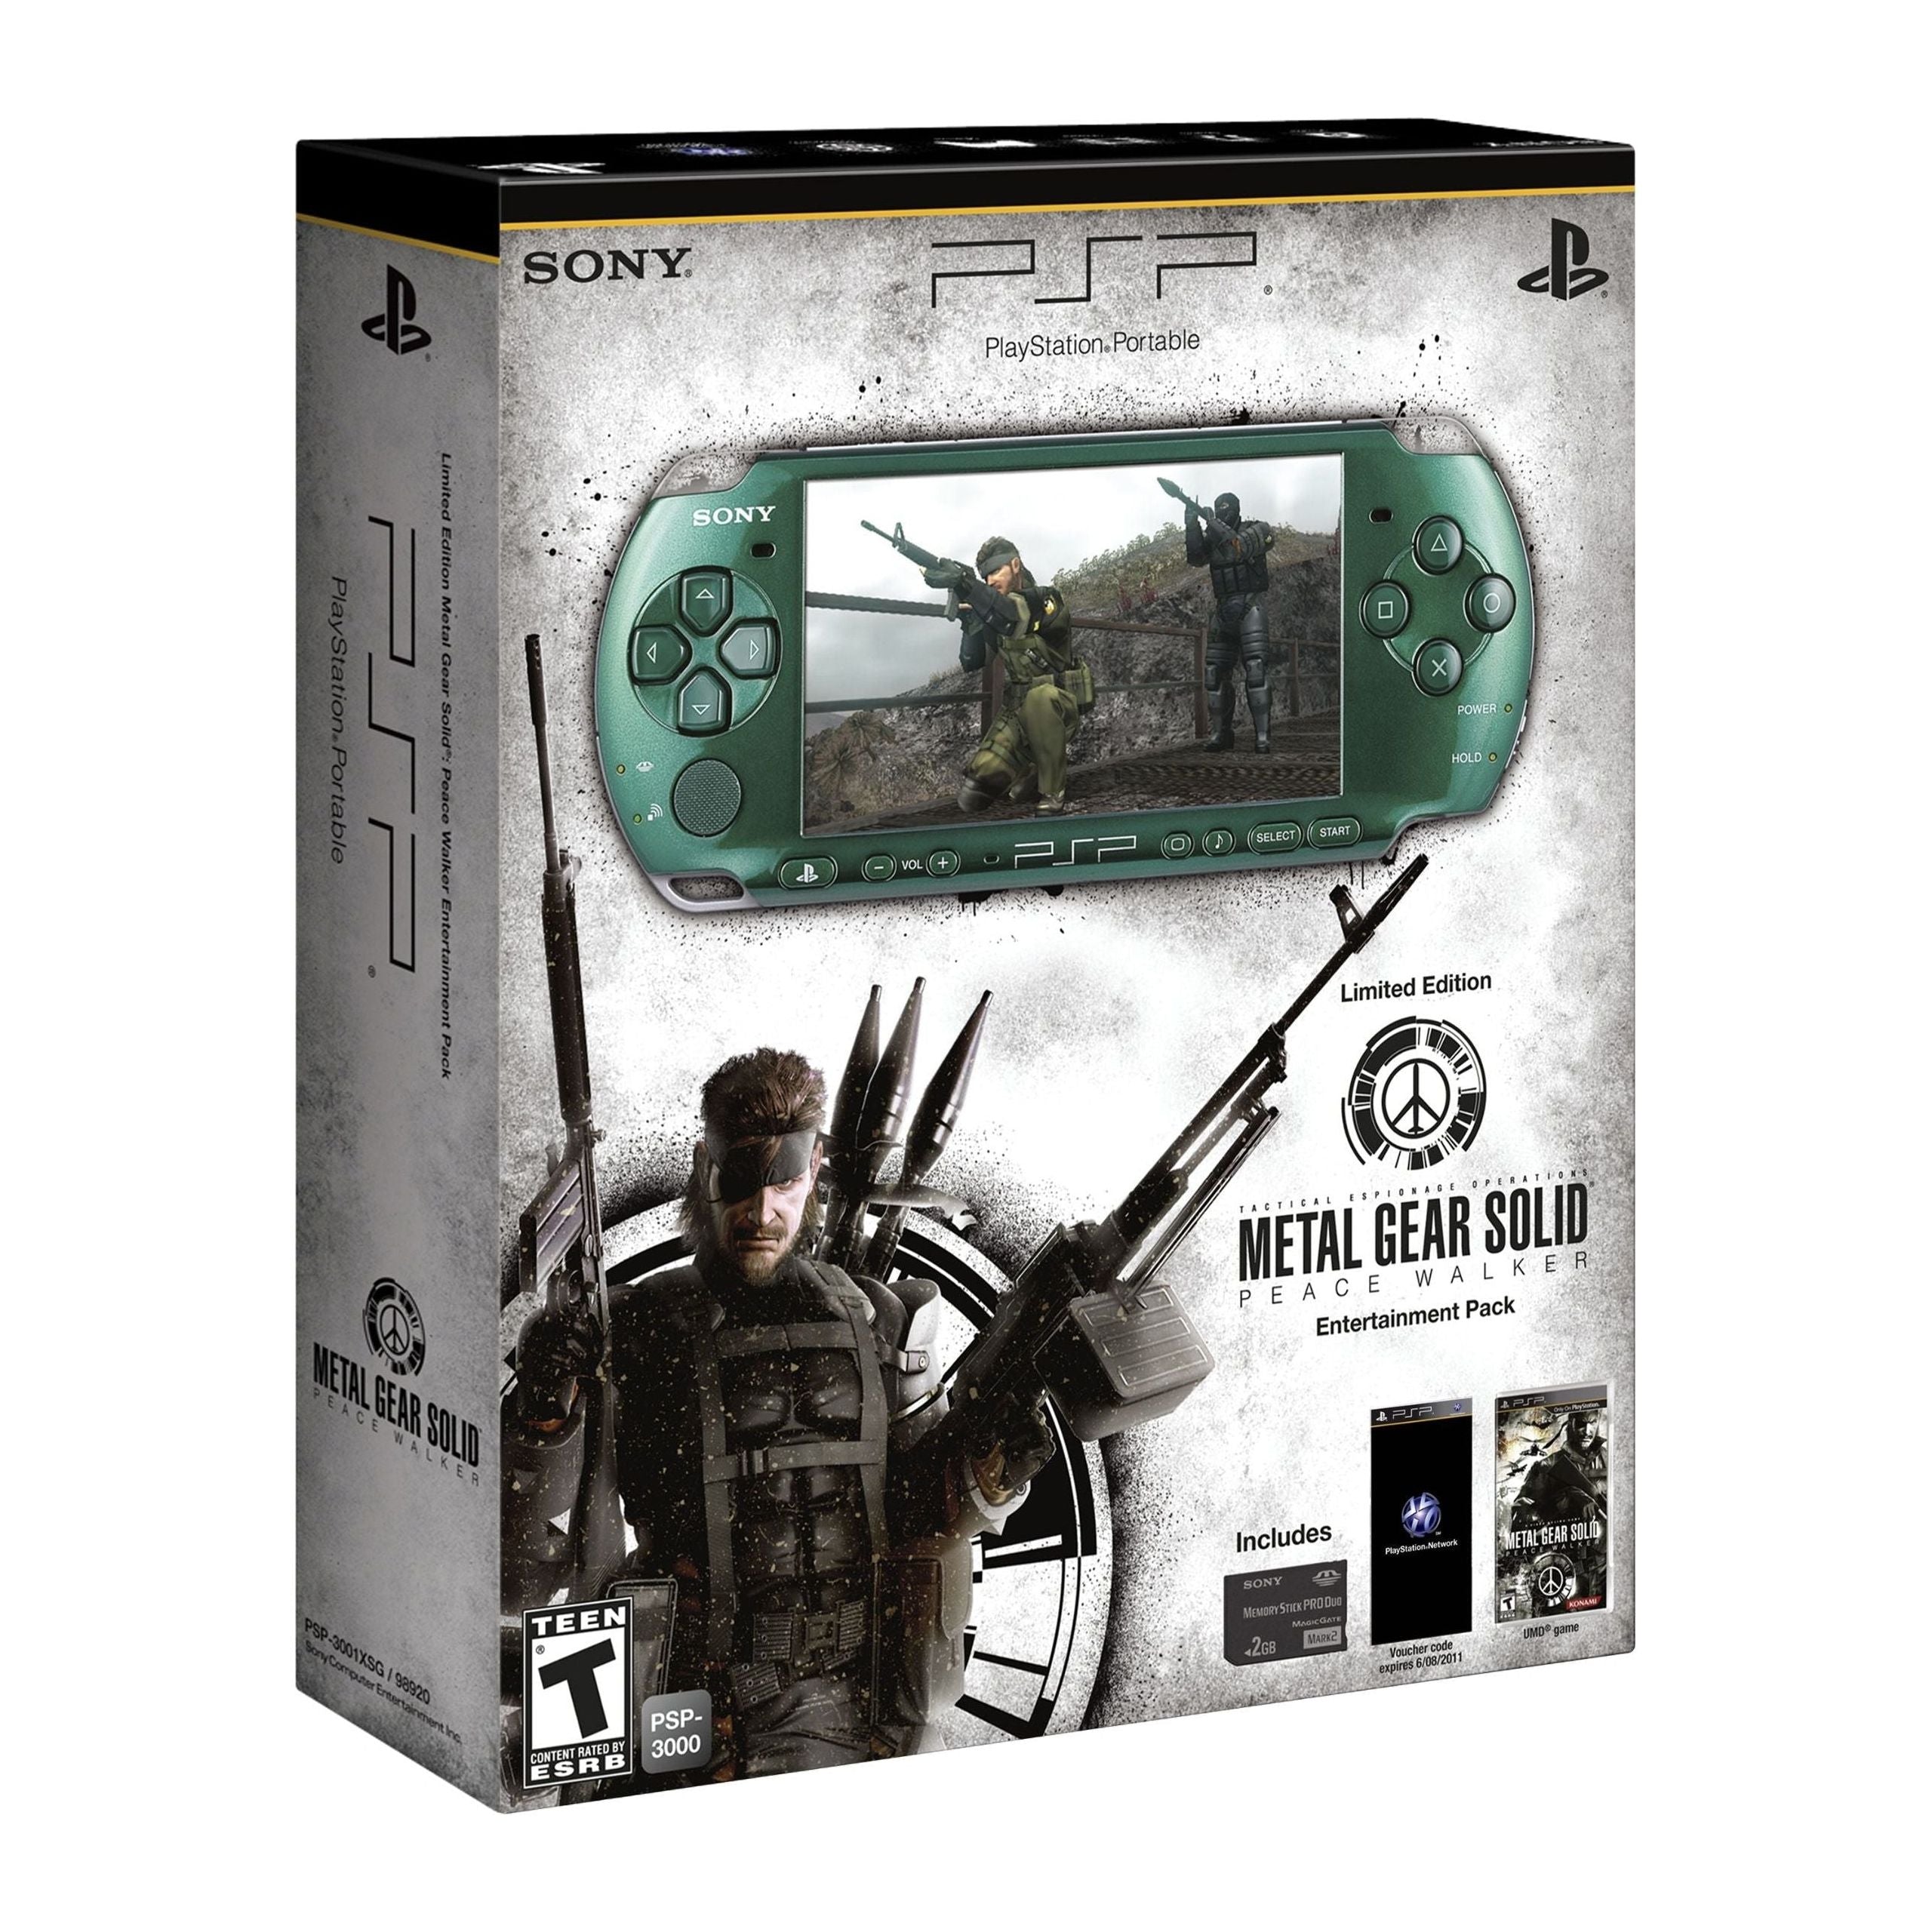 PlayStation Portable Metal Gear Solid Peace Walker Limited Edition Entertainment Pack